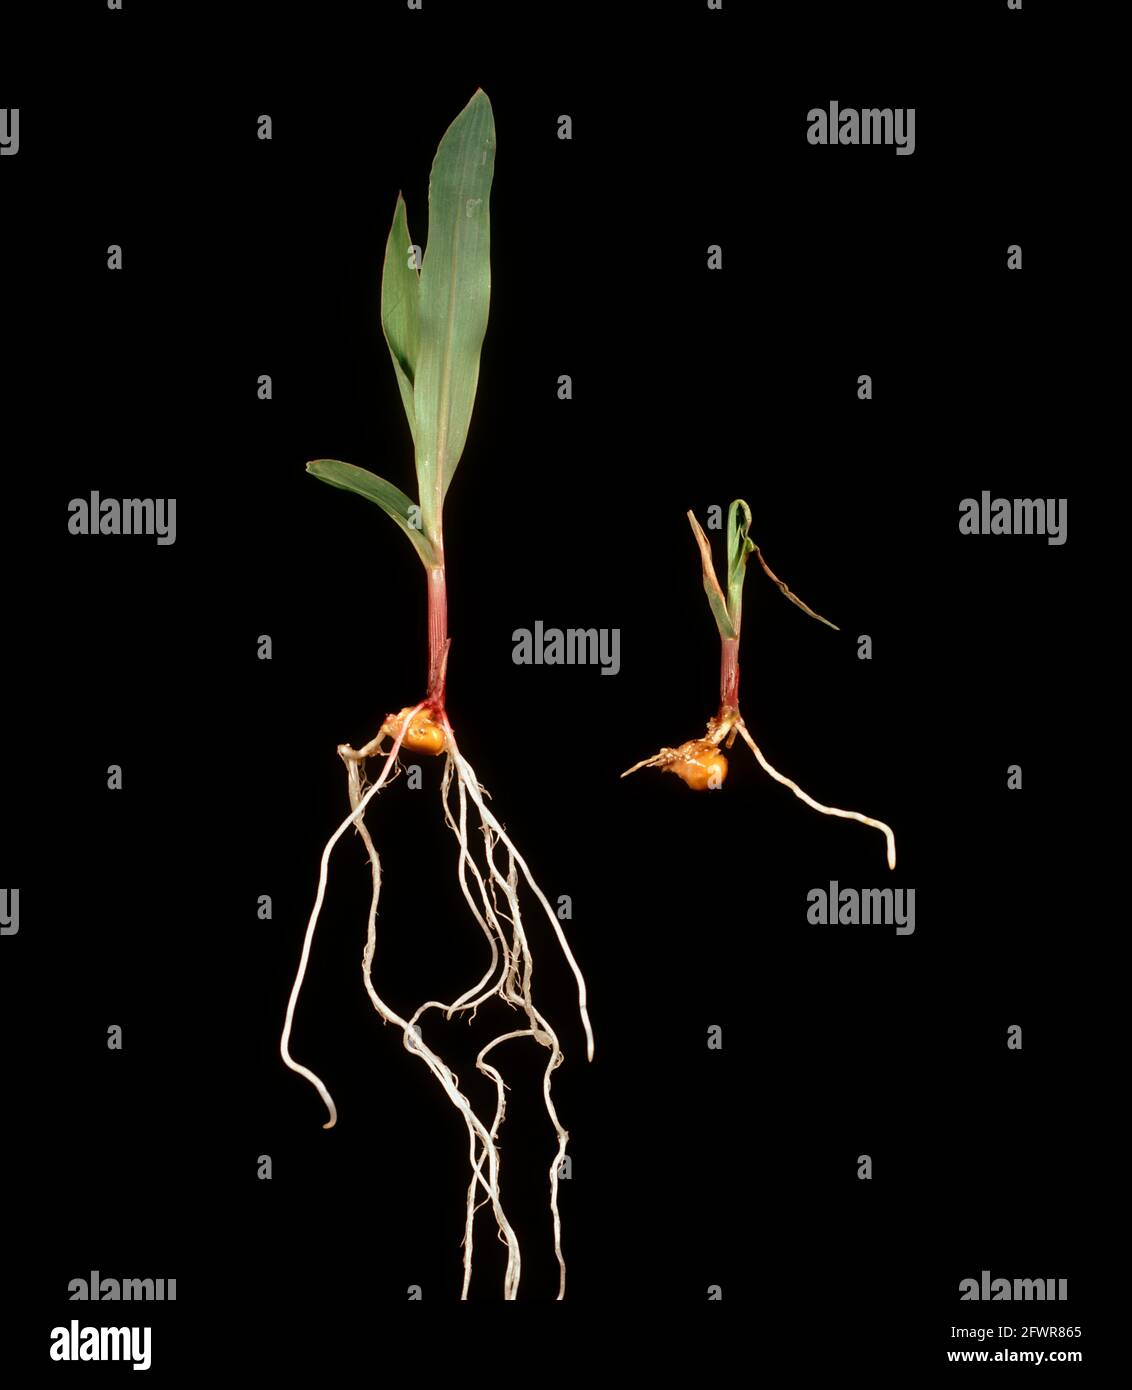 Damping off (Pythium ultimum) damage to maize, corn  or sweetcorn  seedling compared to healthy plant Stock Photo